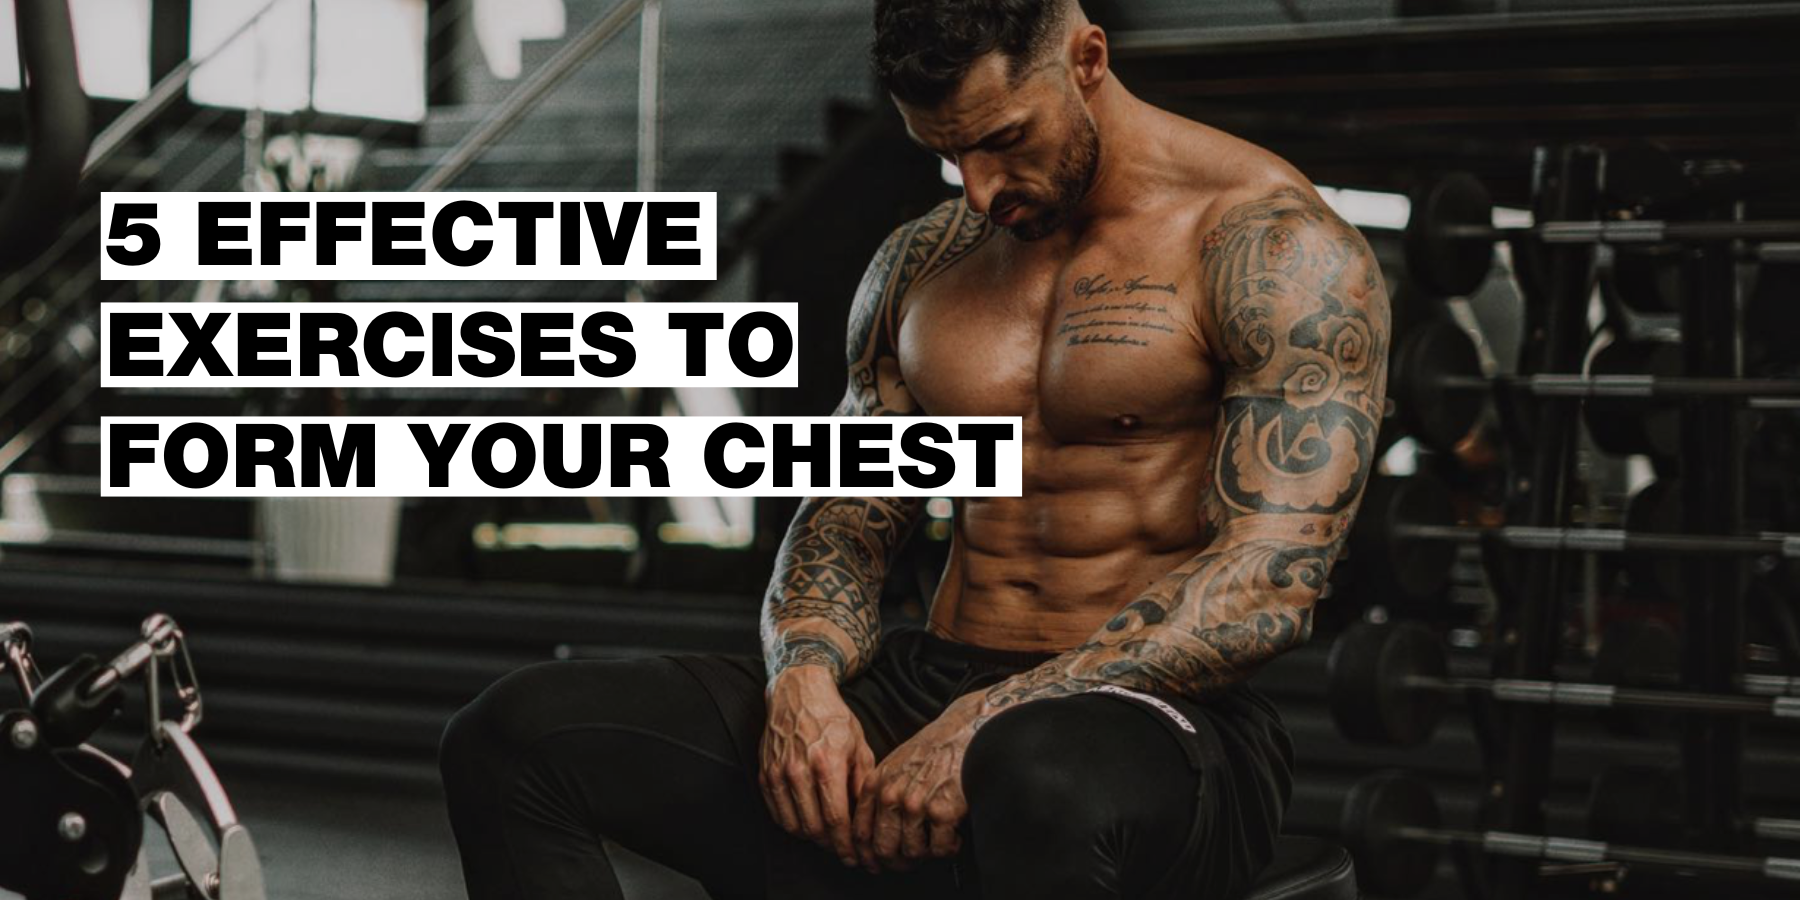 How to build a sculpted chest? Remember these 5 exercises. (PS: Bench press alone won't cut it)